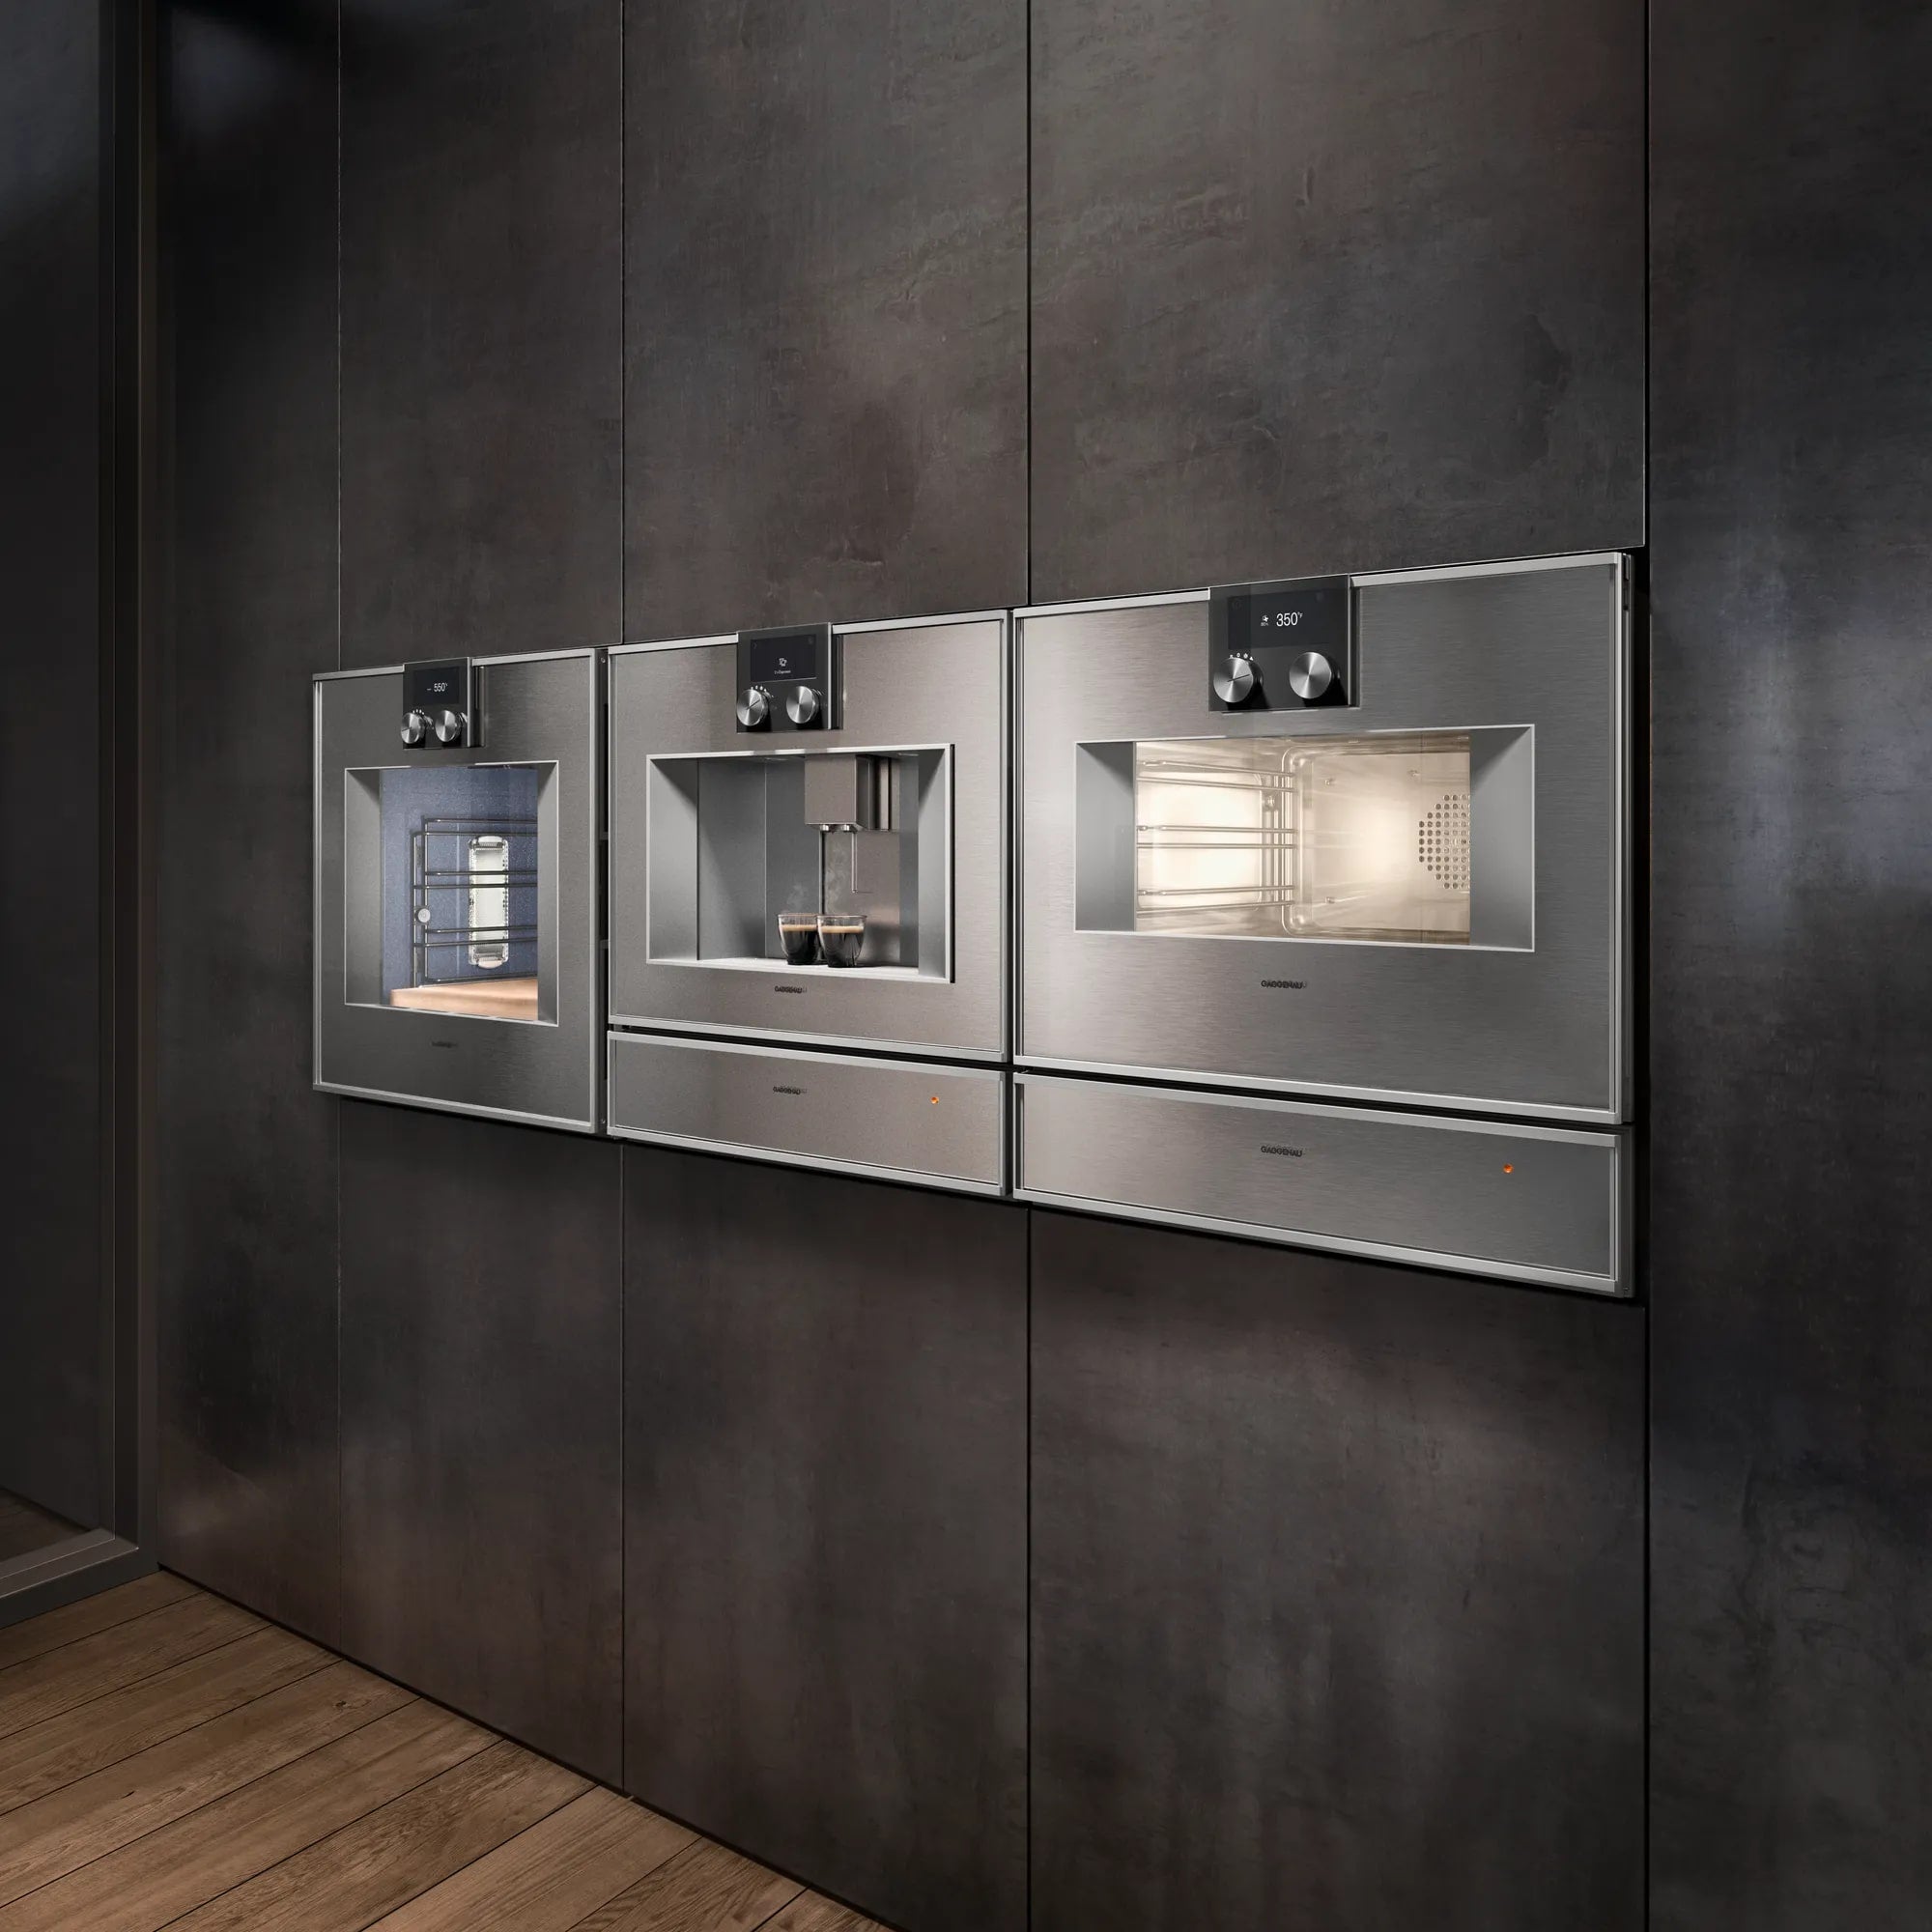 Gaggenau - 0.75 cu. ft Warming Drawer Wall Oven in Stainless - WS461710